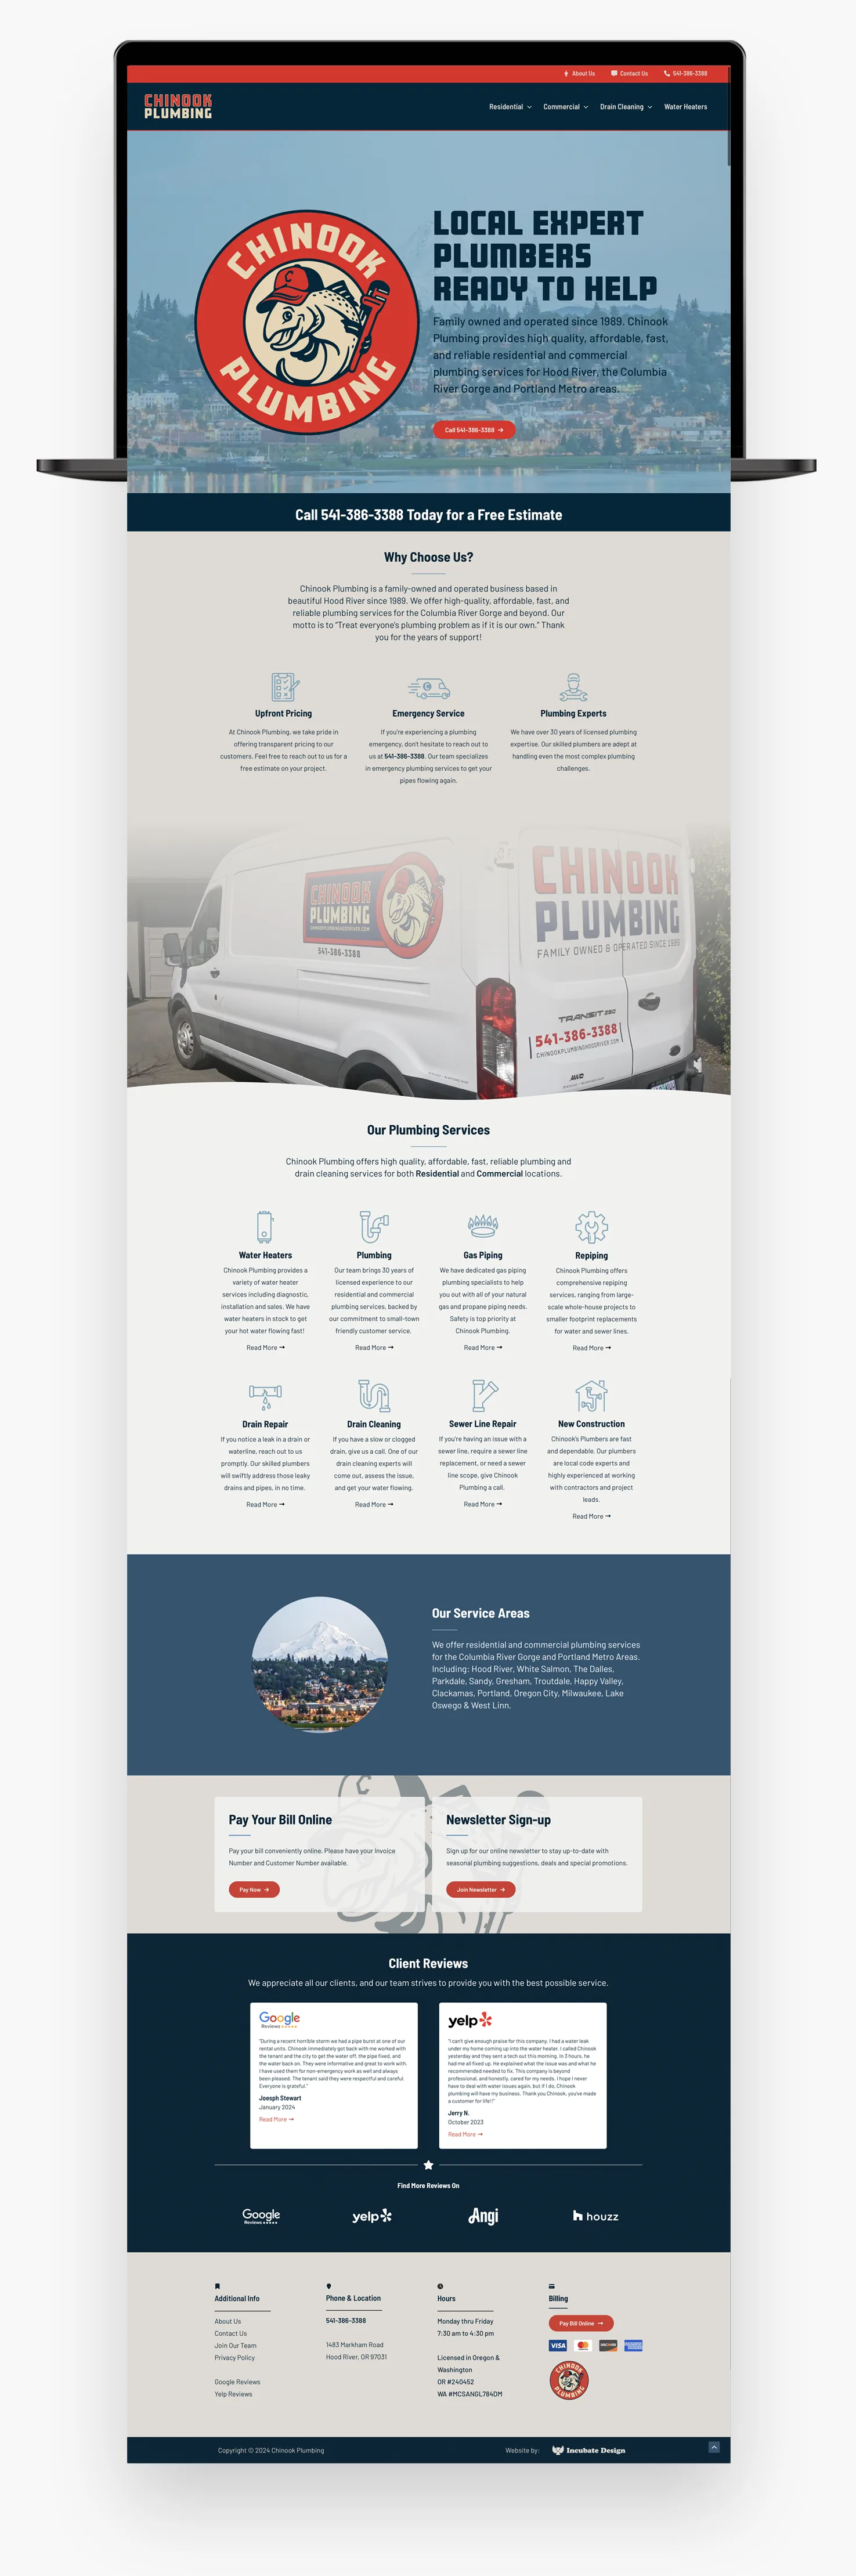 Chinook Plumbing Web design and branding for new website full page view